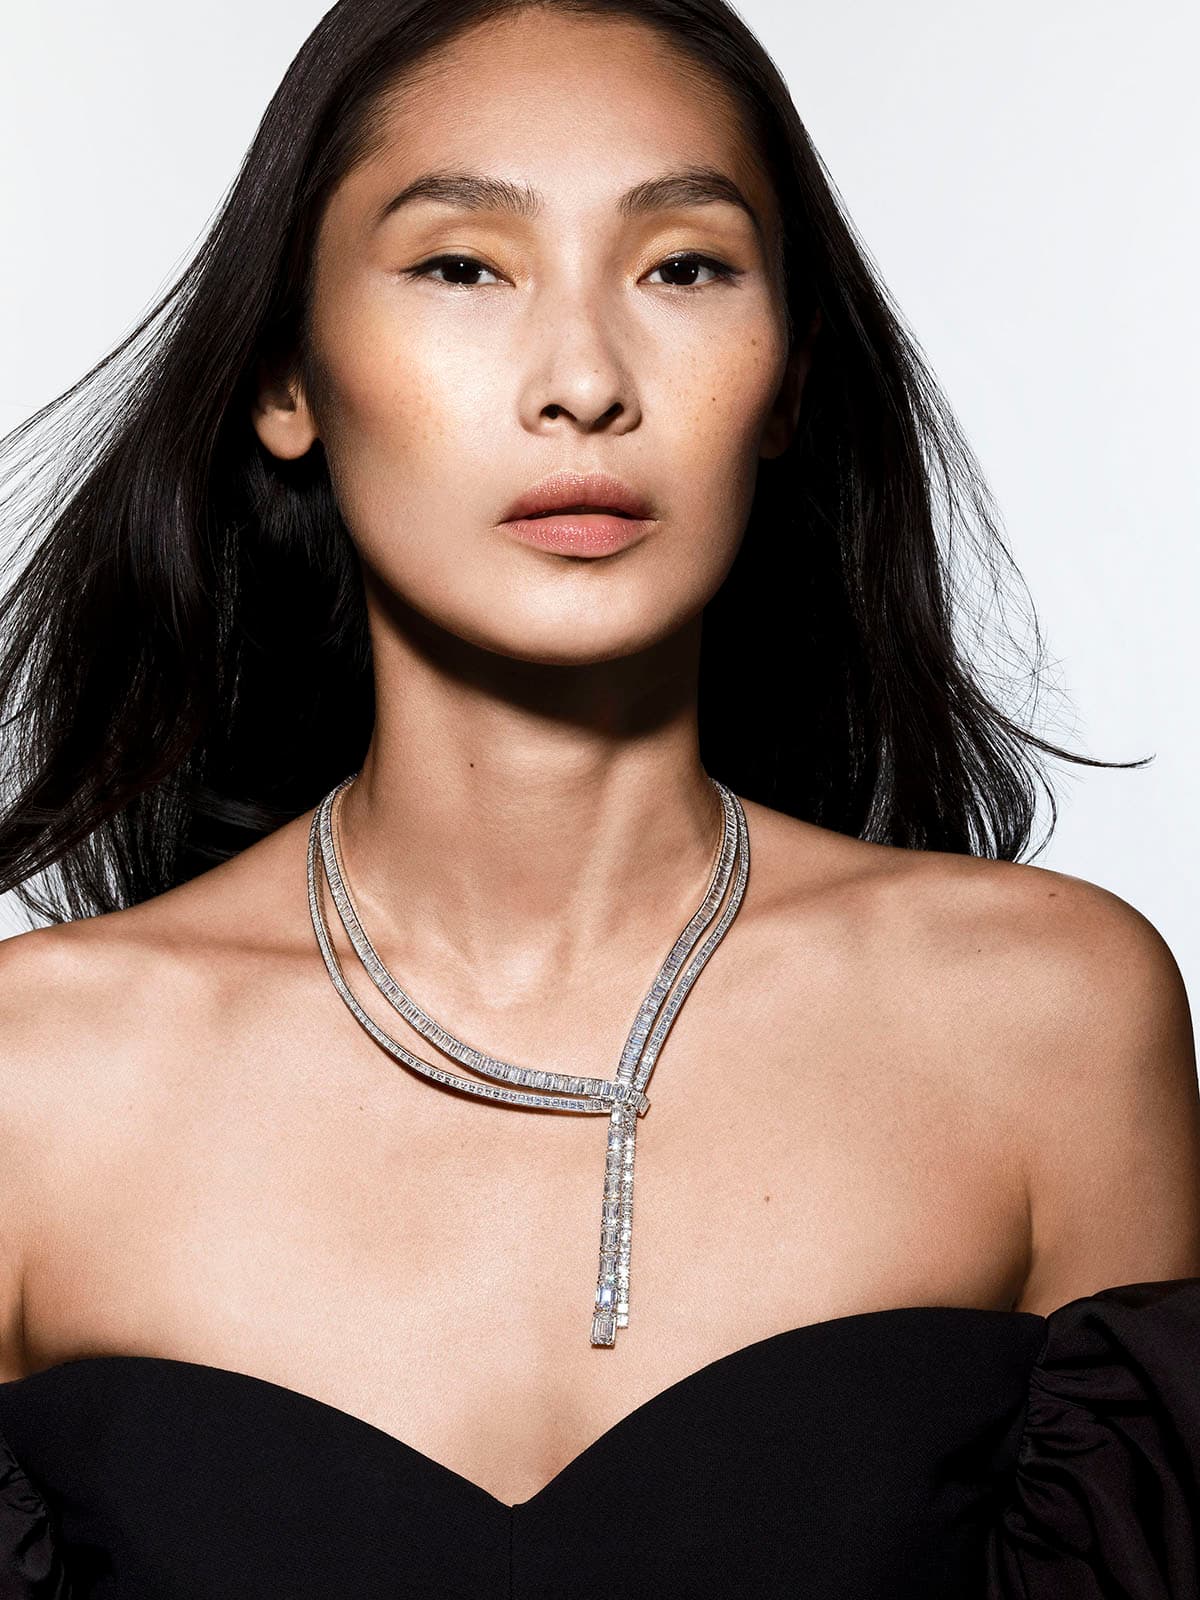 UPDATED TIFFANY & CO JEWELRY COLLECTION 2021 